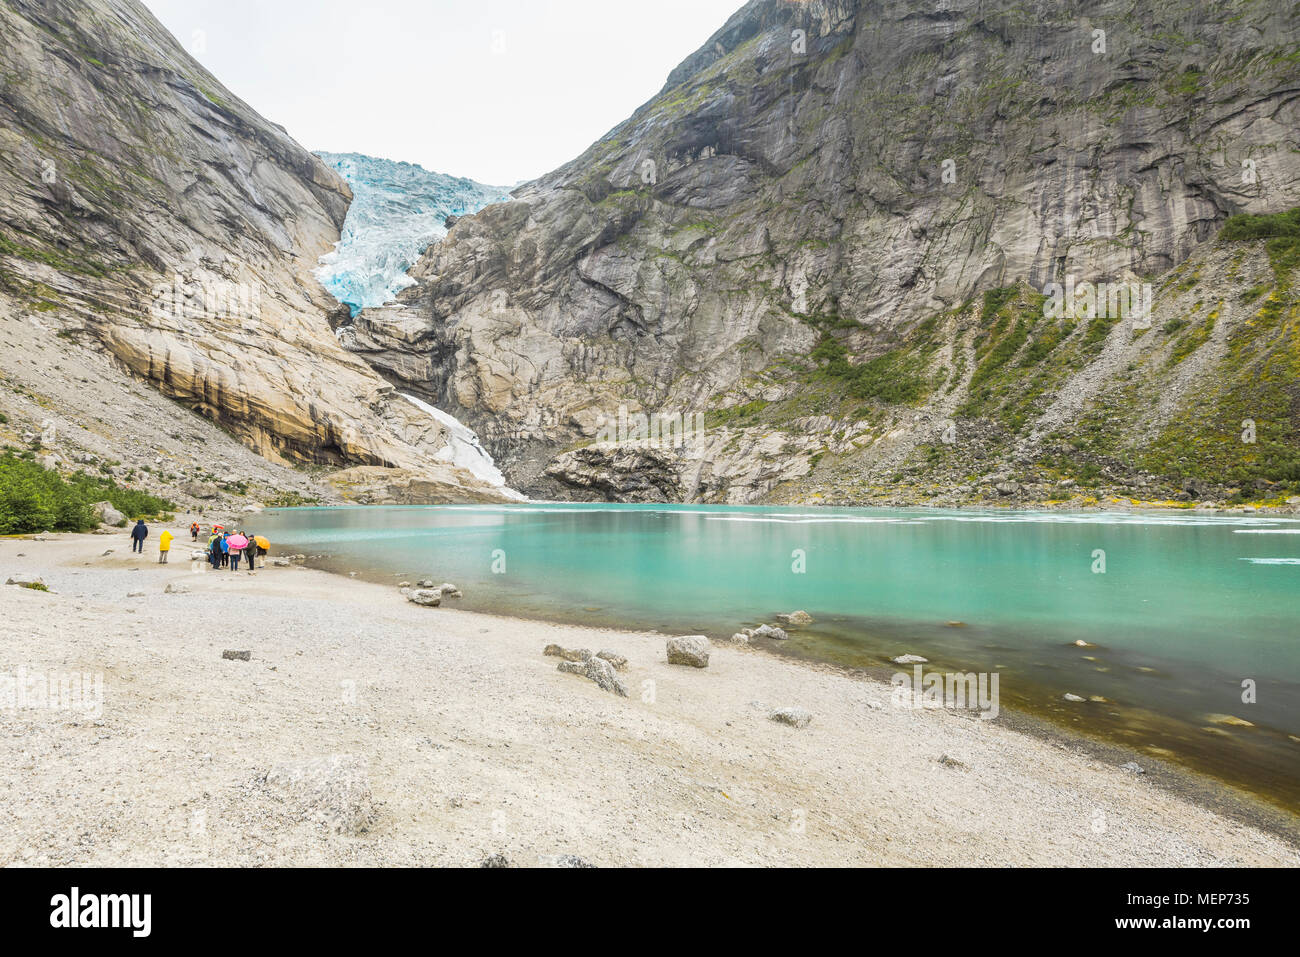 glacier Briksdalsbreen and its lake, Norway, arm of the Jostedal glacier, Oldedalen, Olden at the Nordfjorden, tourists on the shore Stock Photo